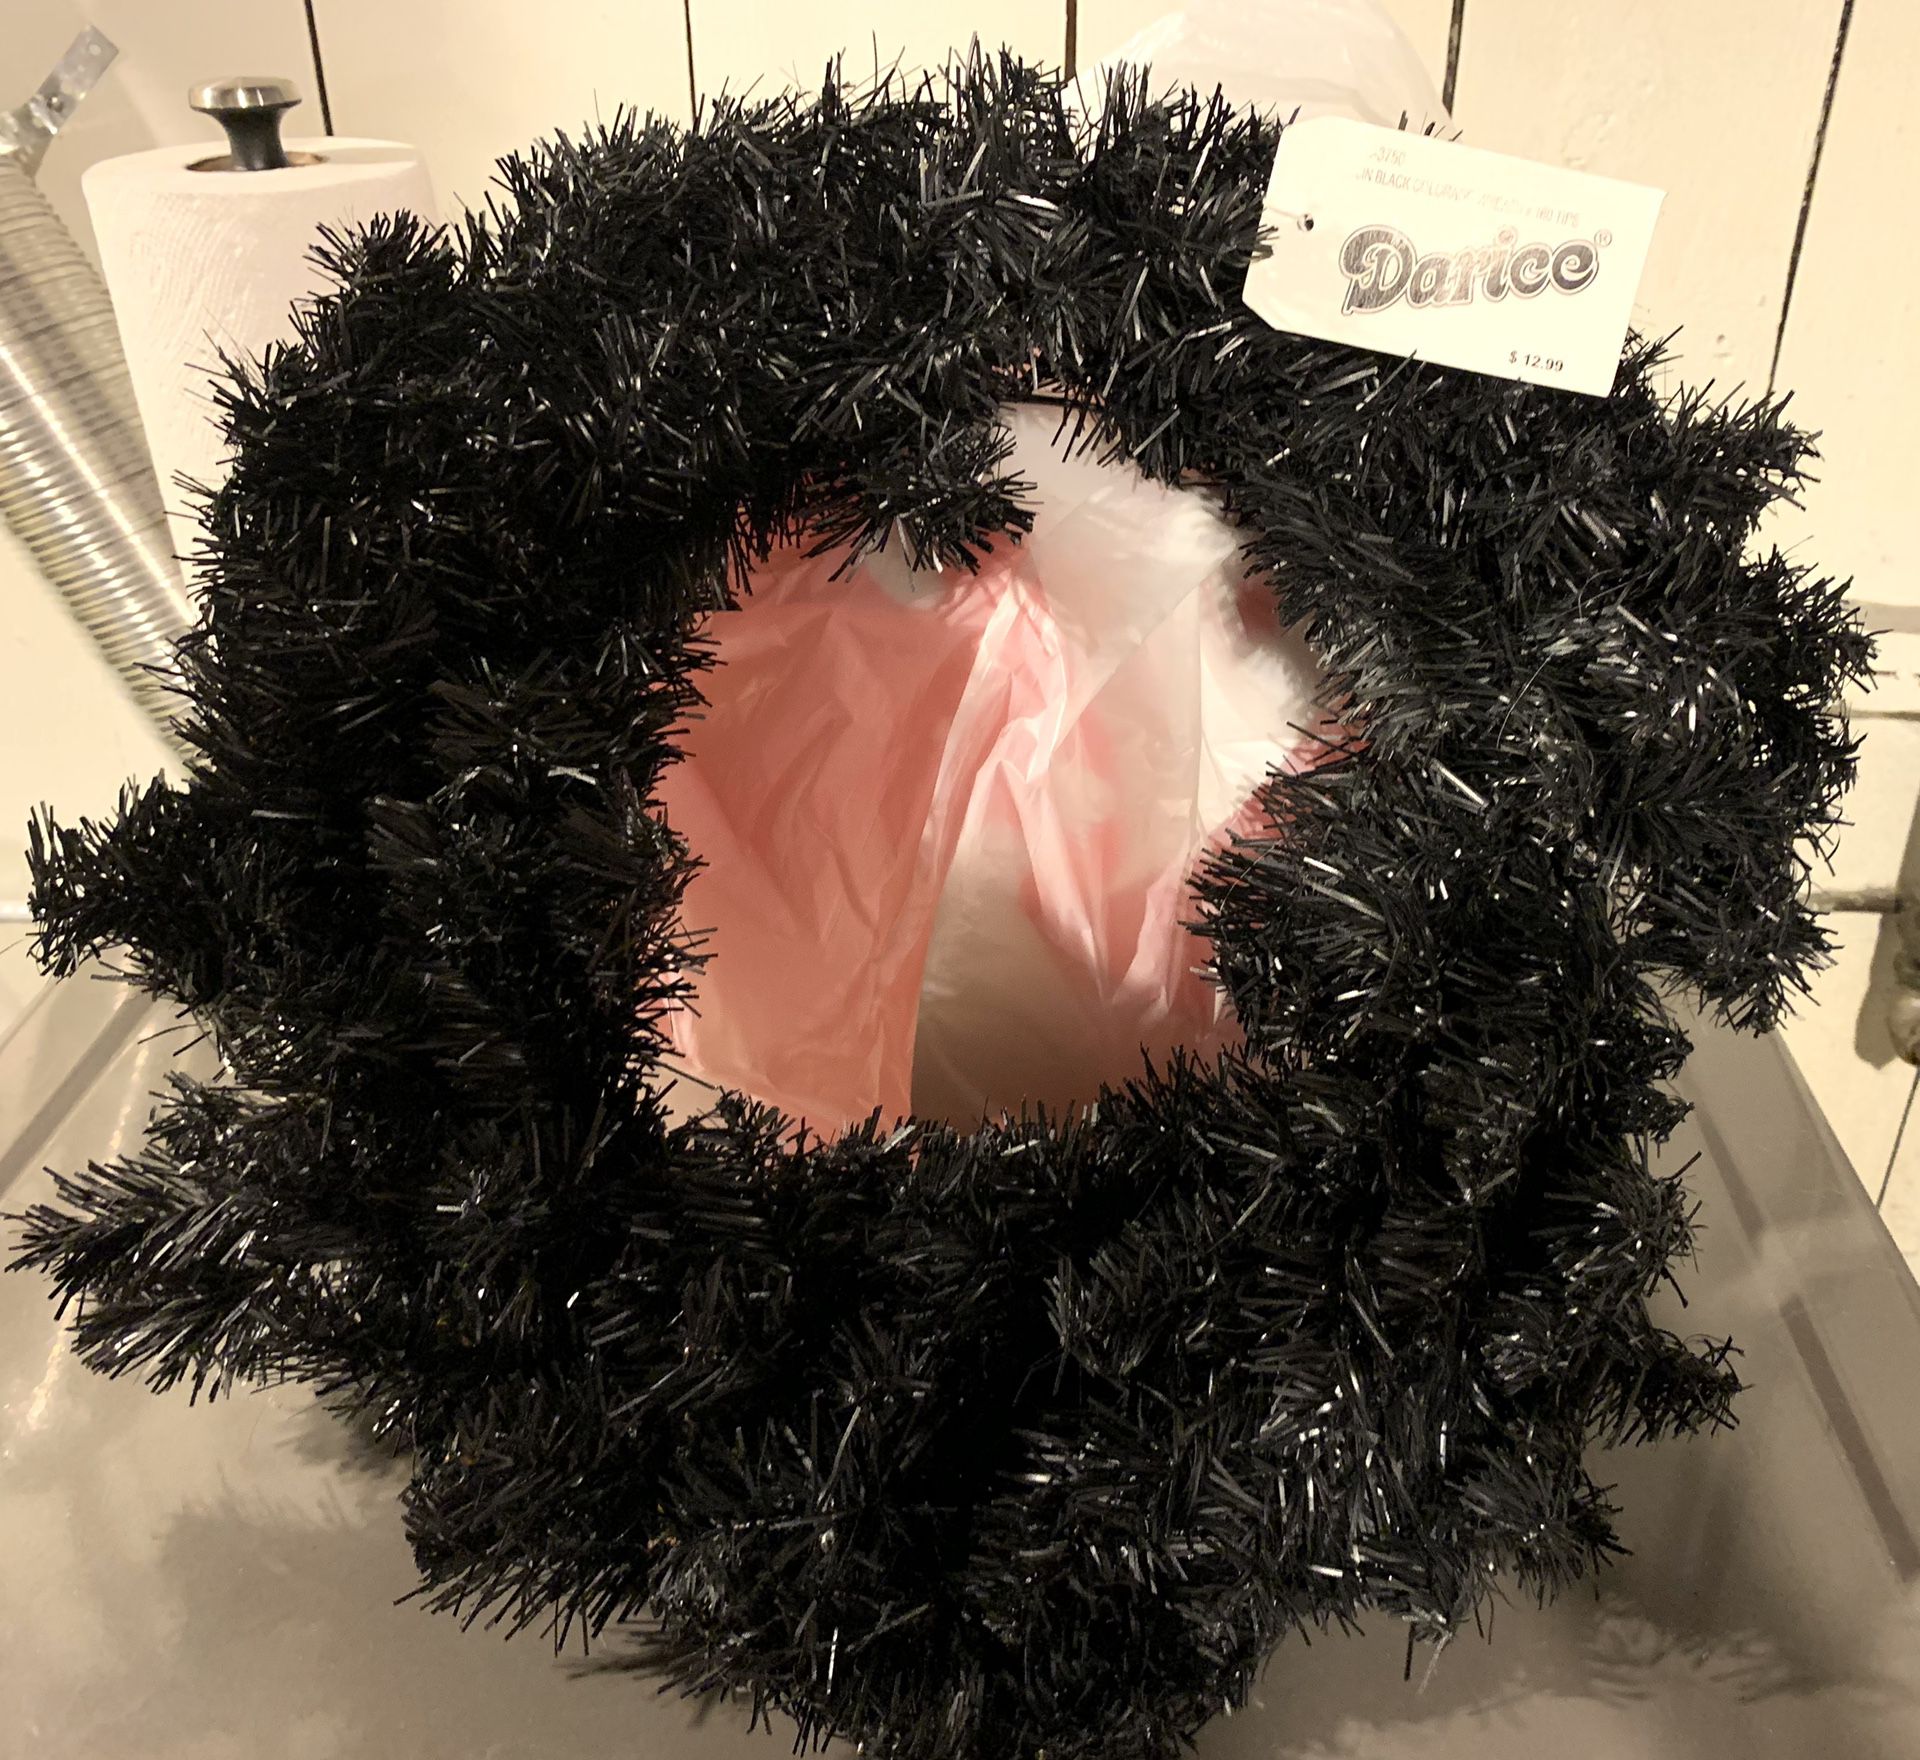 Darcie 20” Black Plain Wreath all Ready To Decorate For Halloween